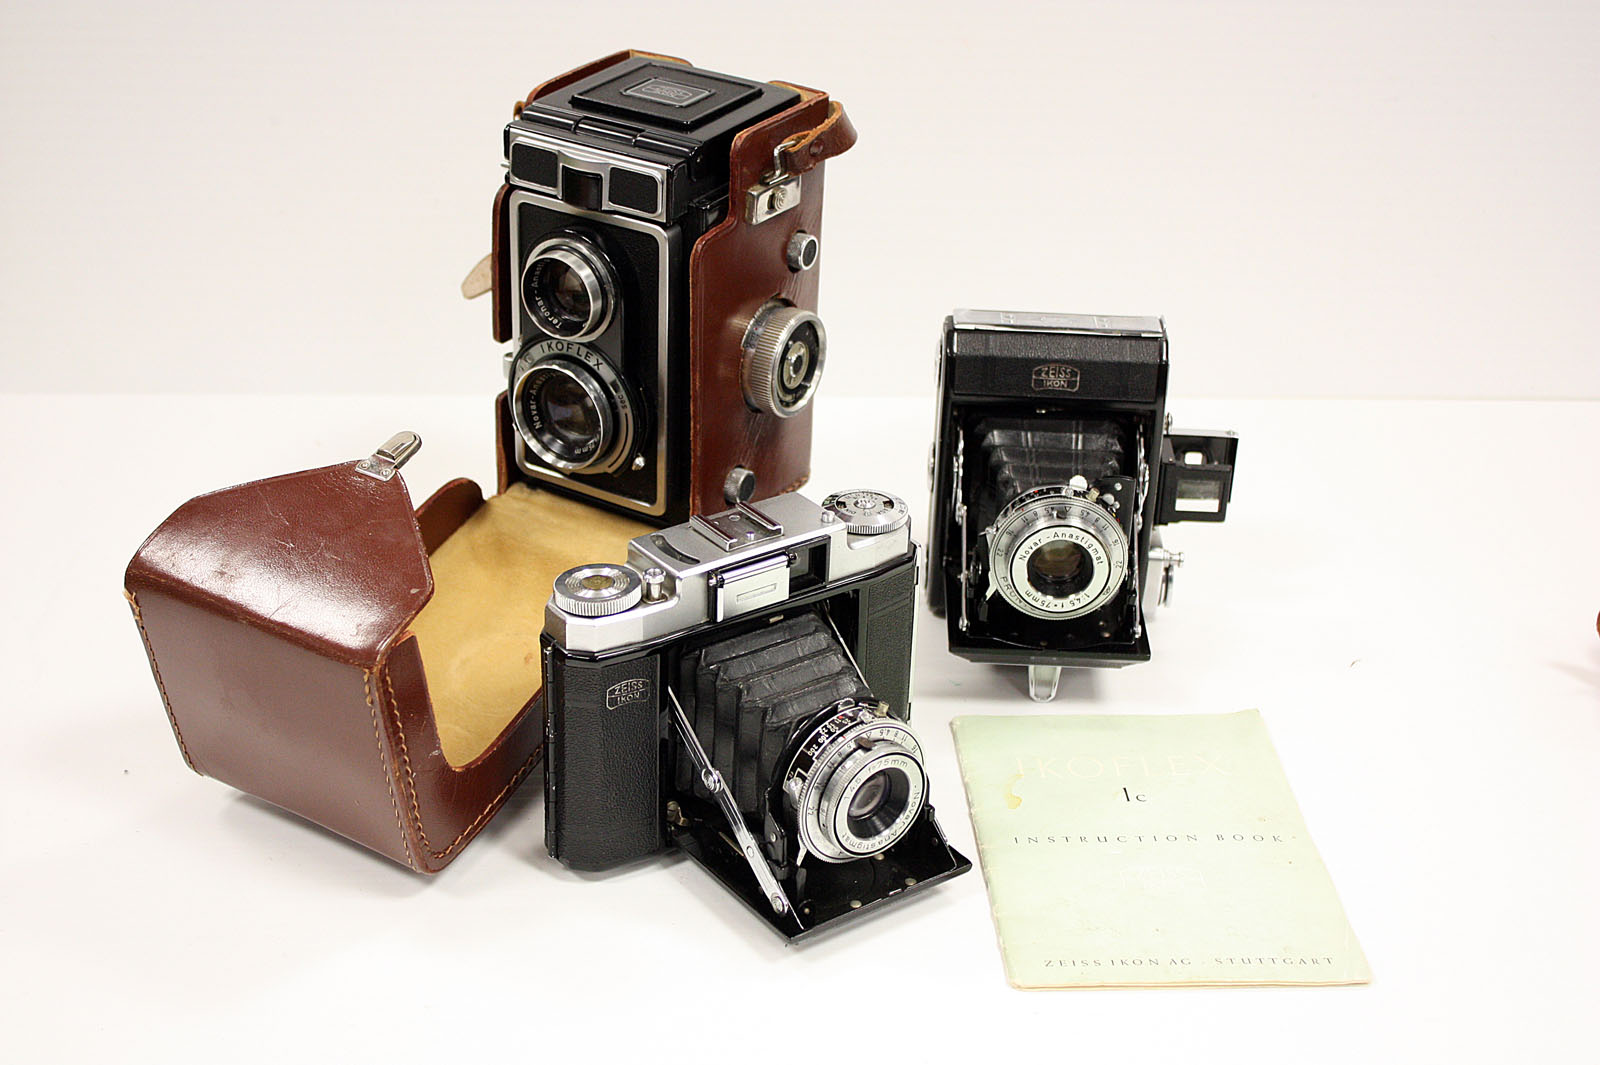 Zeiss Cameras: an Ikoflex 1c with original instruction book in maker's case and two other Zeiss